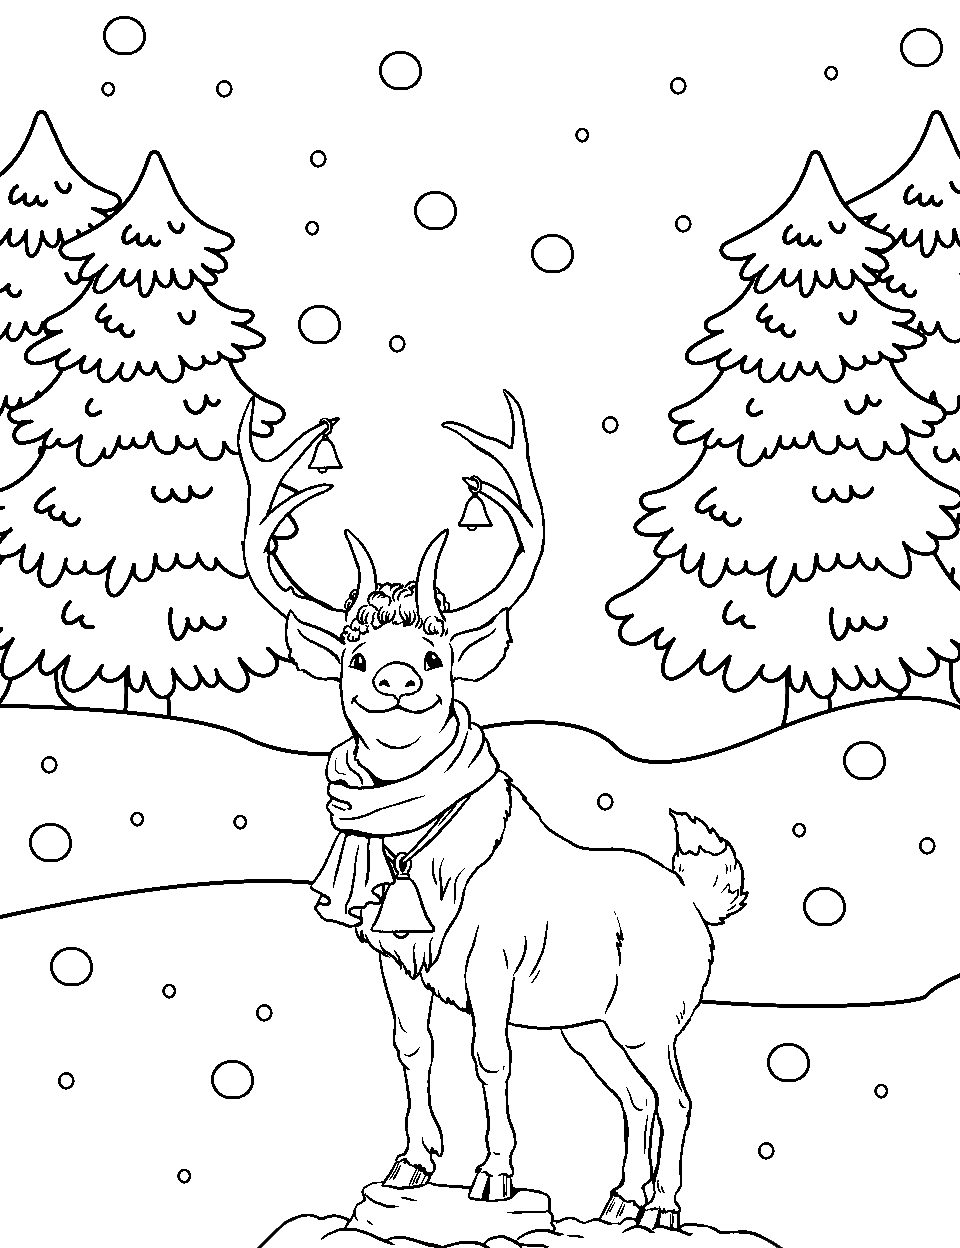 Reindeer in the Snow Santa Coloring Page - A single reindeer standing in a snowy landscape.